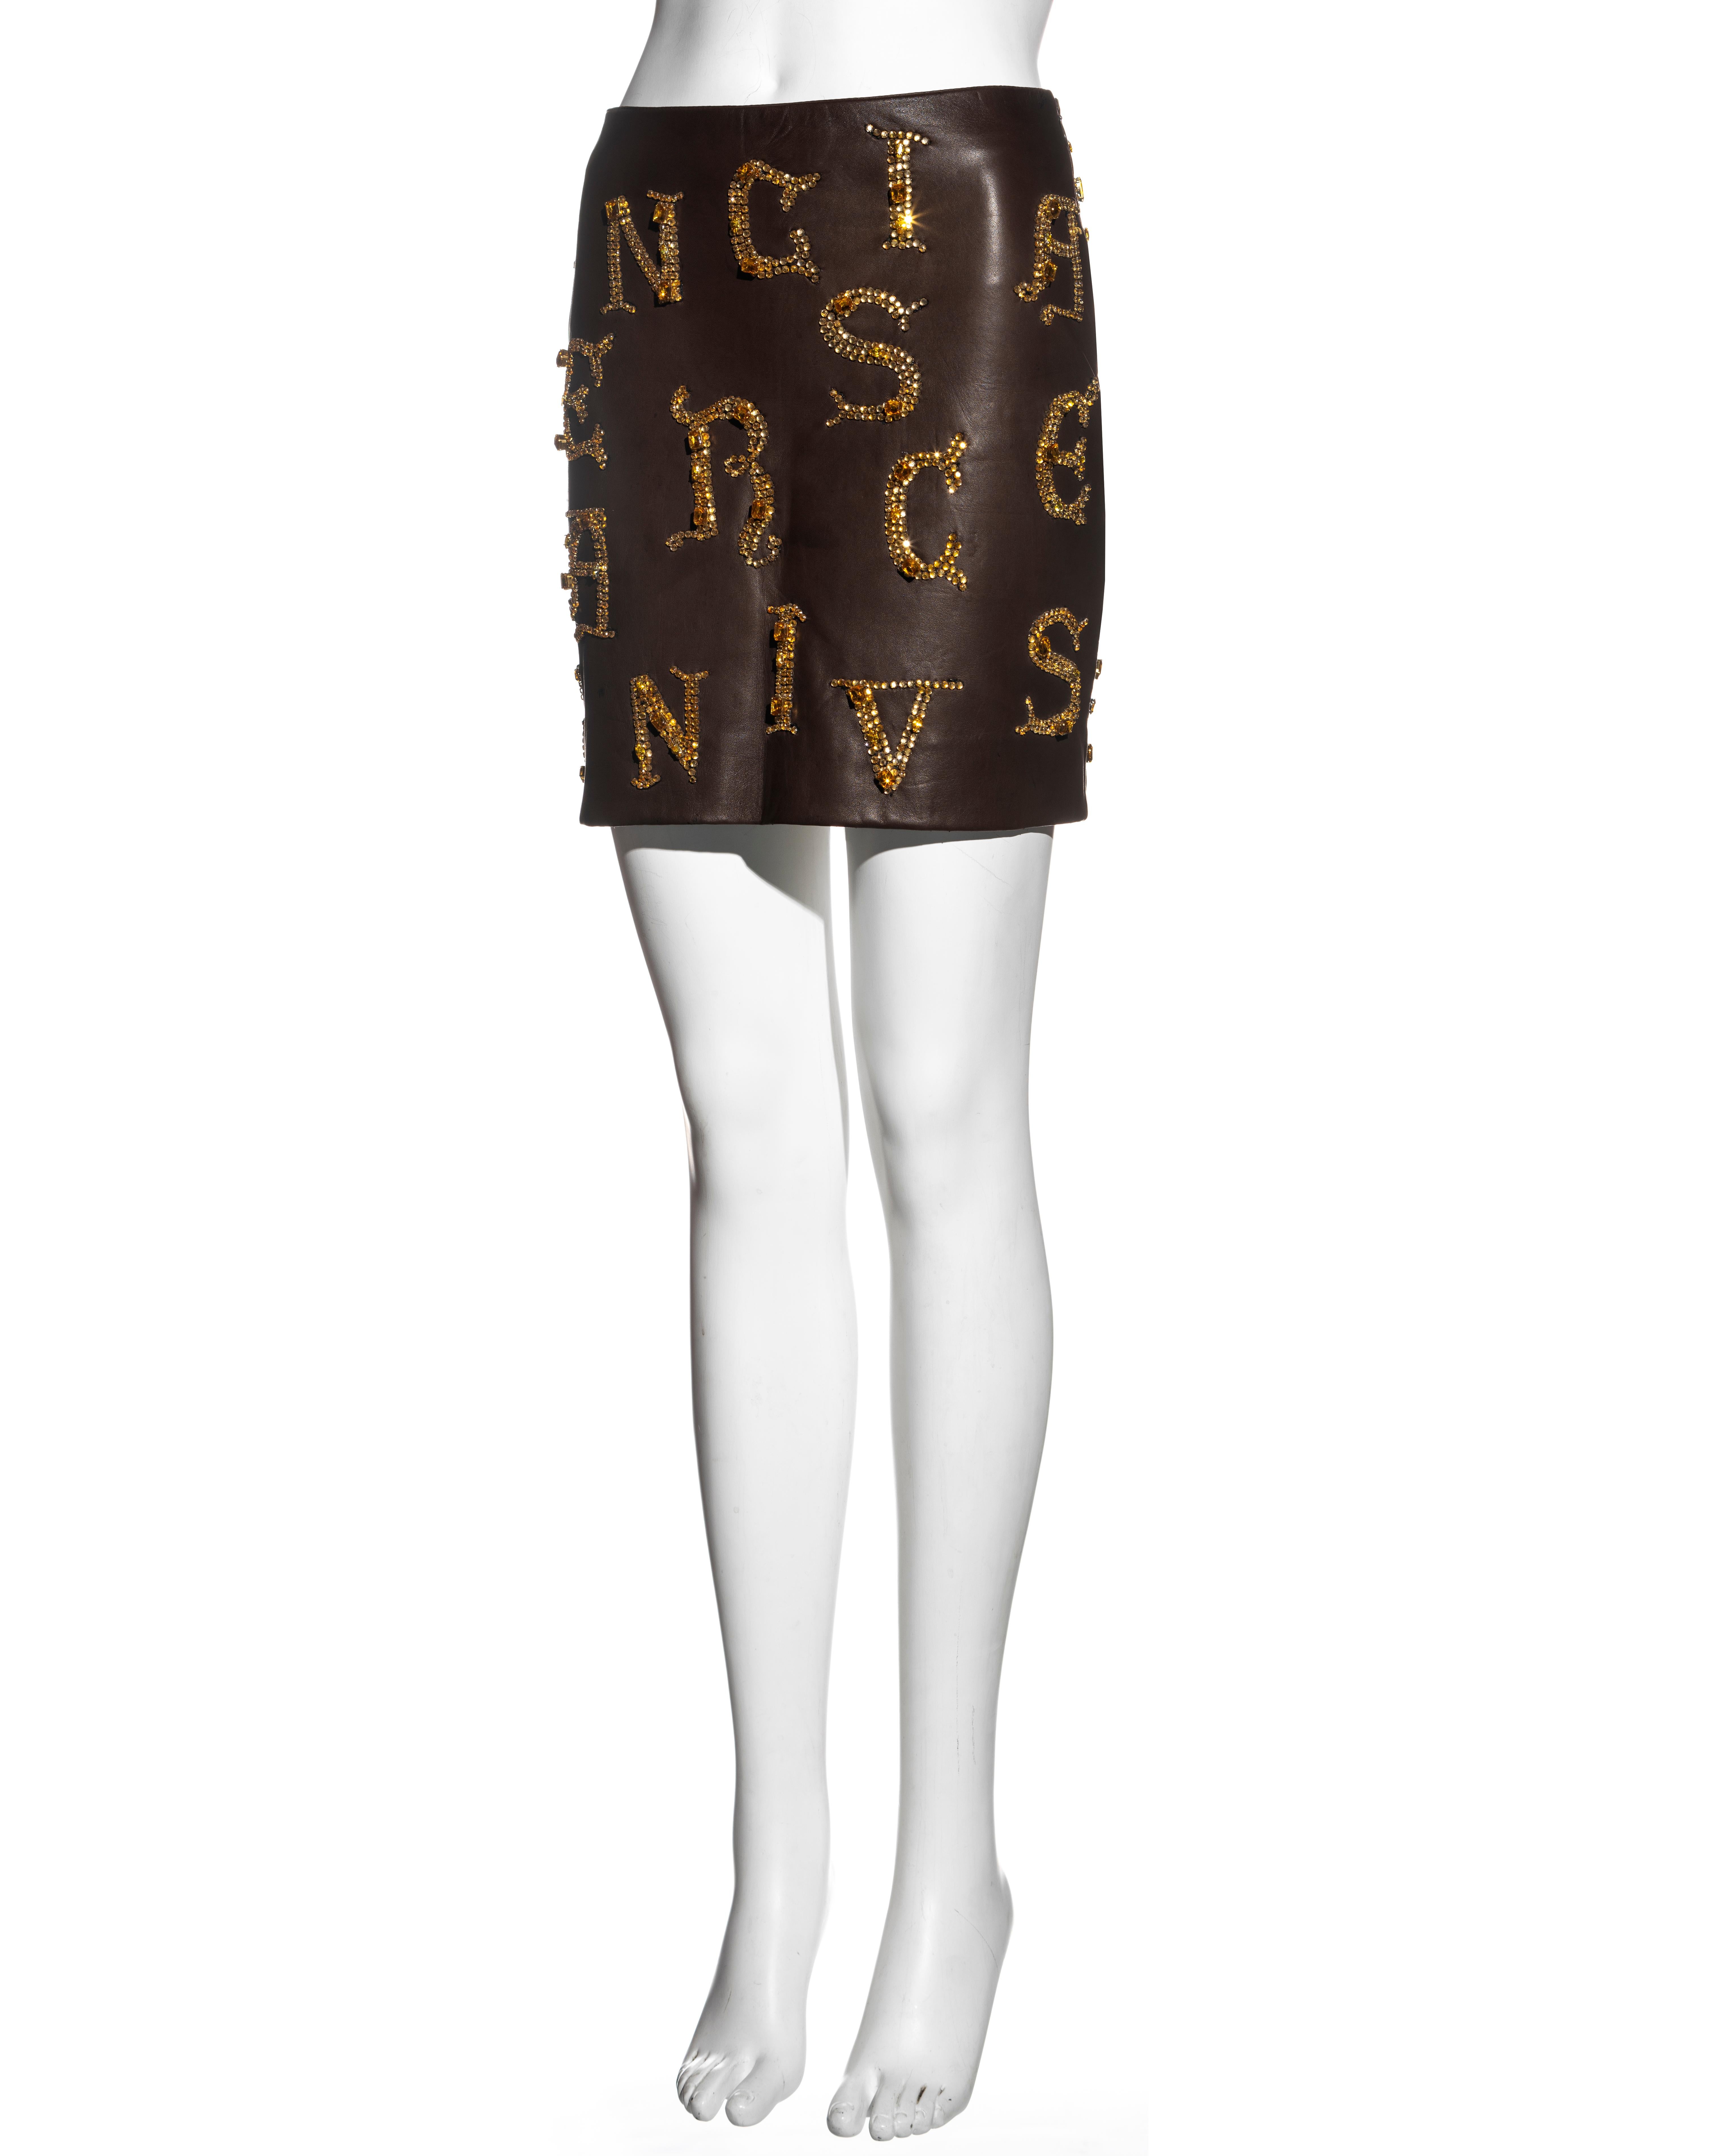 Atelier Versace brown leather skirt with gold crystal calligraphy, fw 1997 For Sale 2